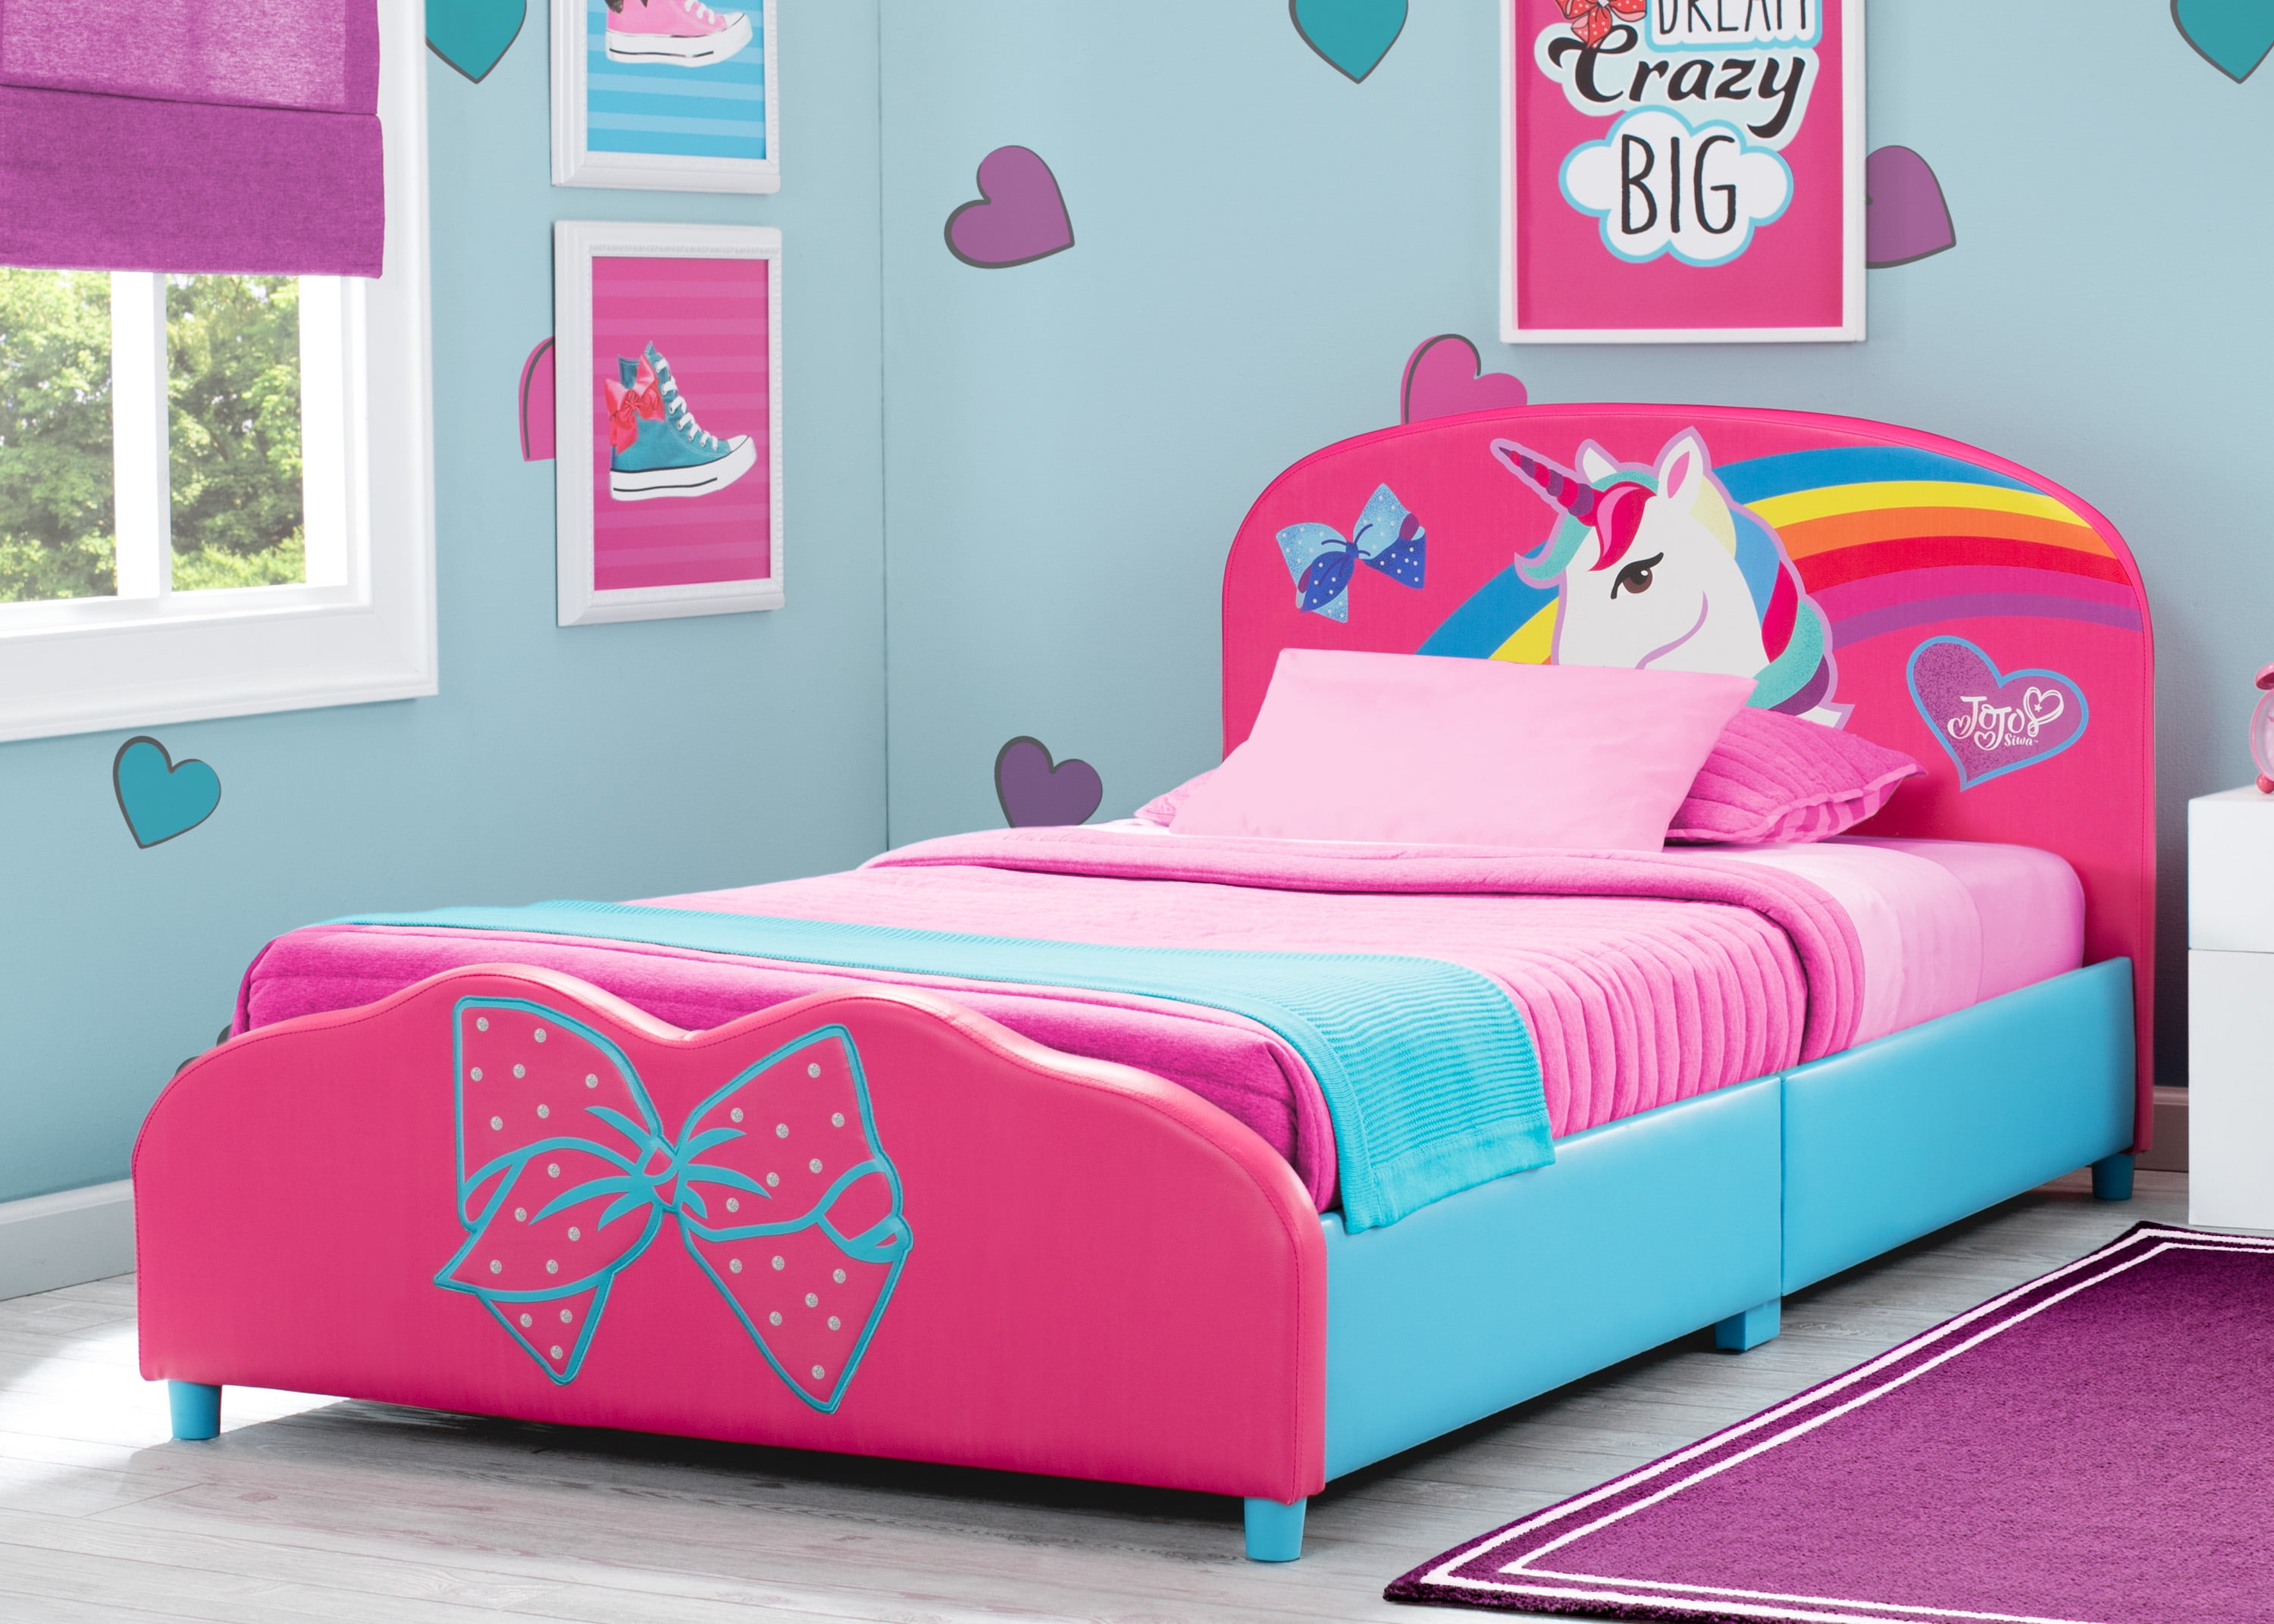 New Delta Children Upholstered Twin Bed JoJo Siwa For Girls Fast Delivery 